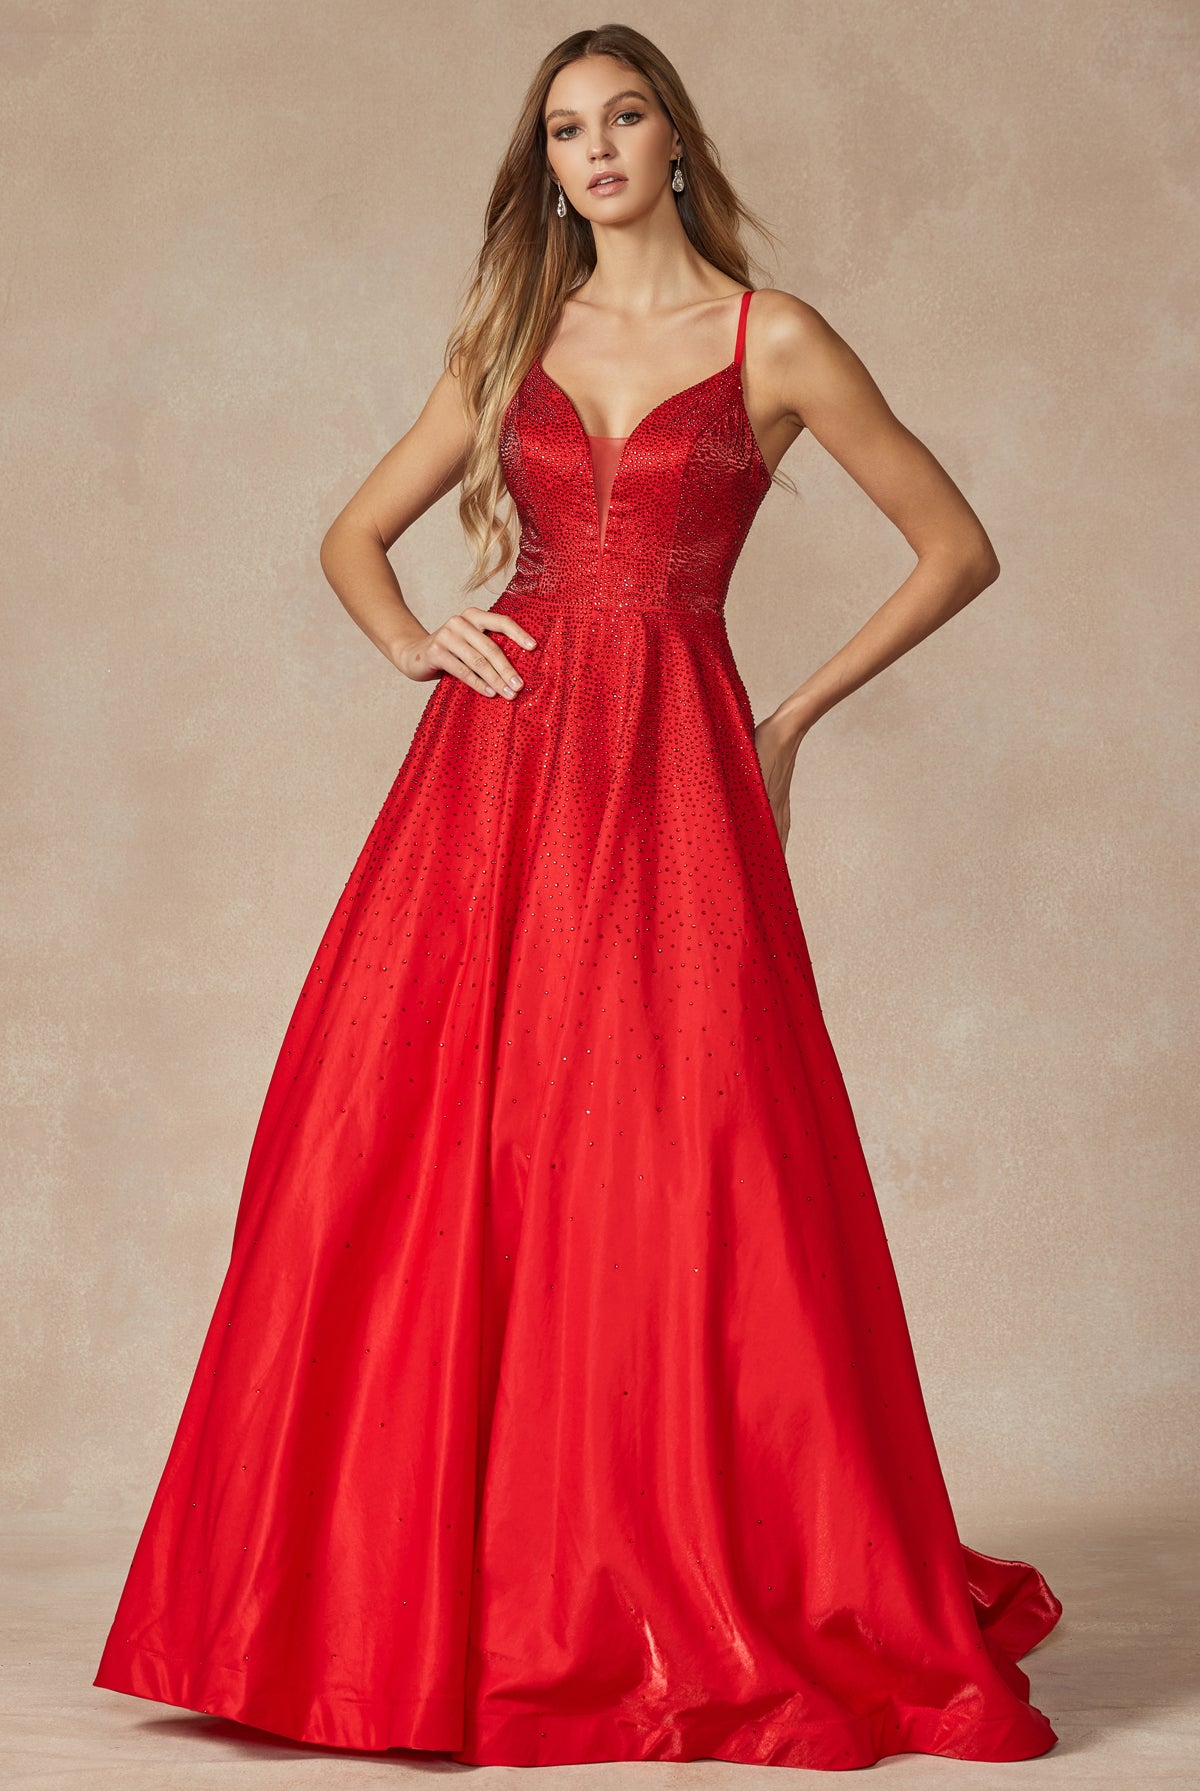 Red prom gown with stone accents